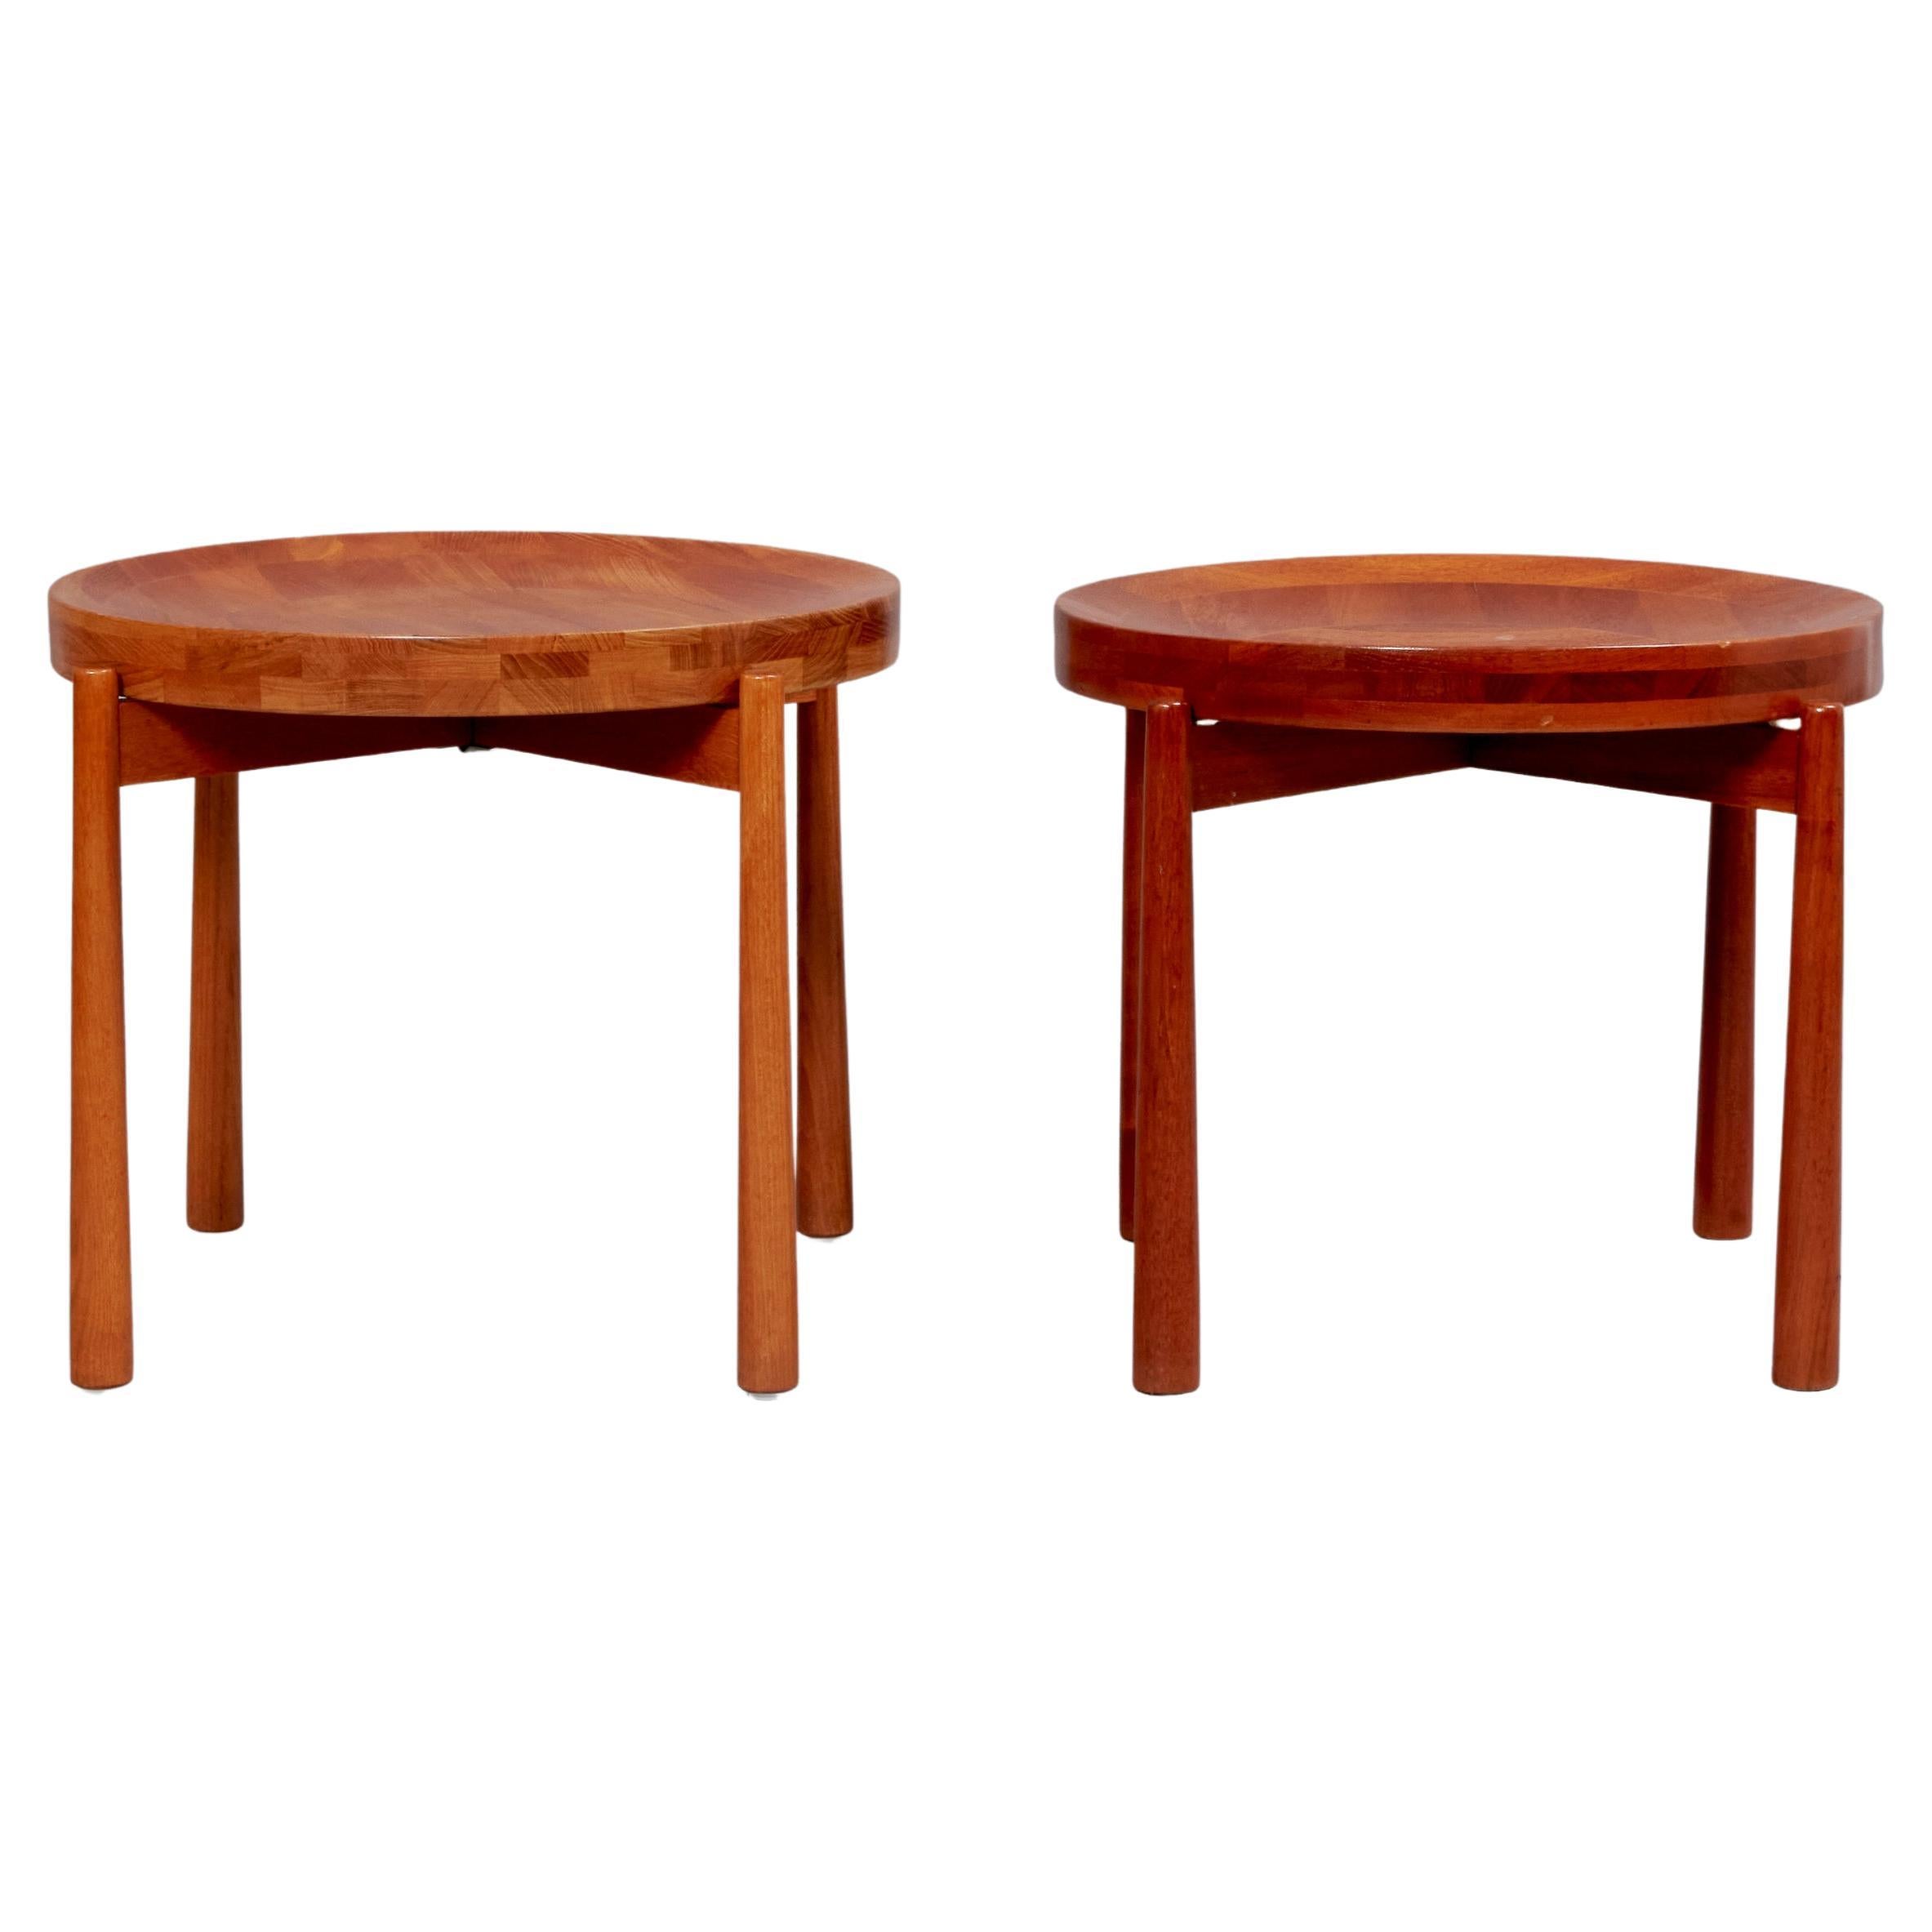 Mid-century modern Jens Quistgaard Teak Wood Side Table and Tray